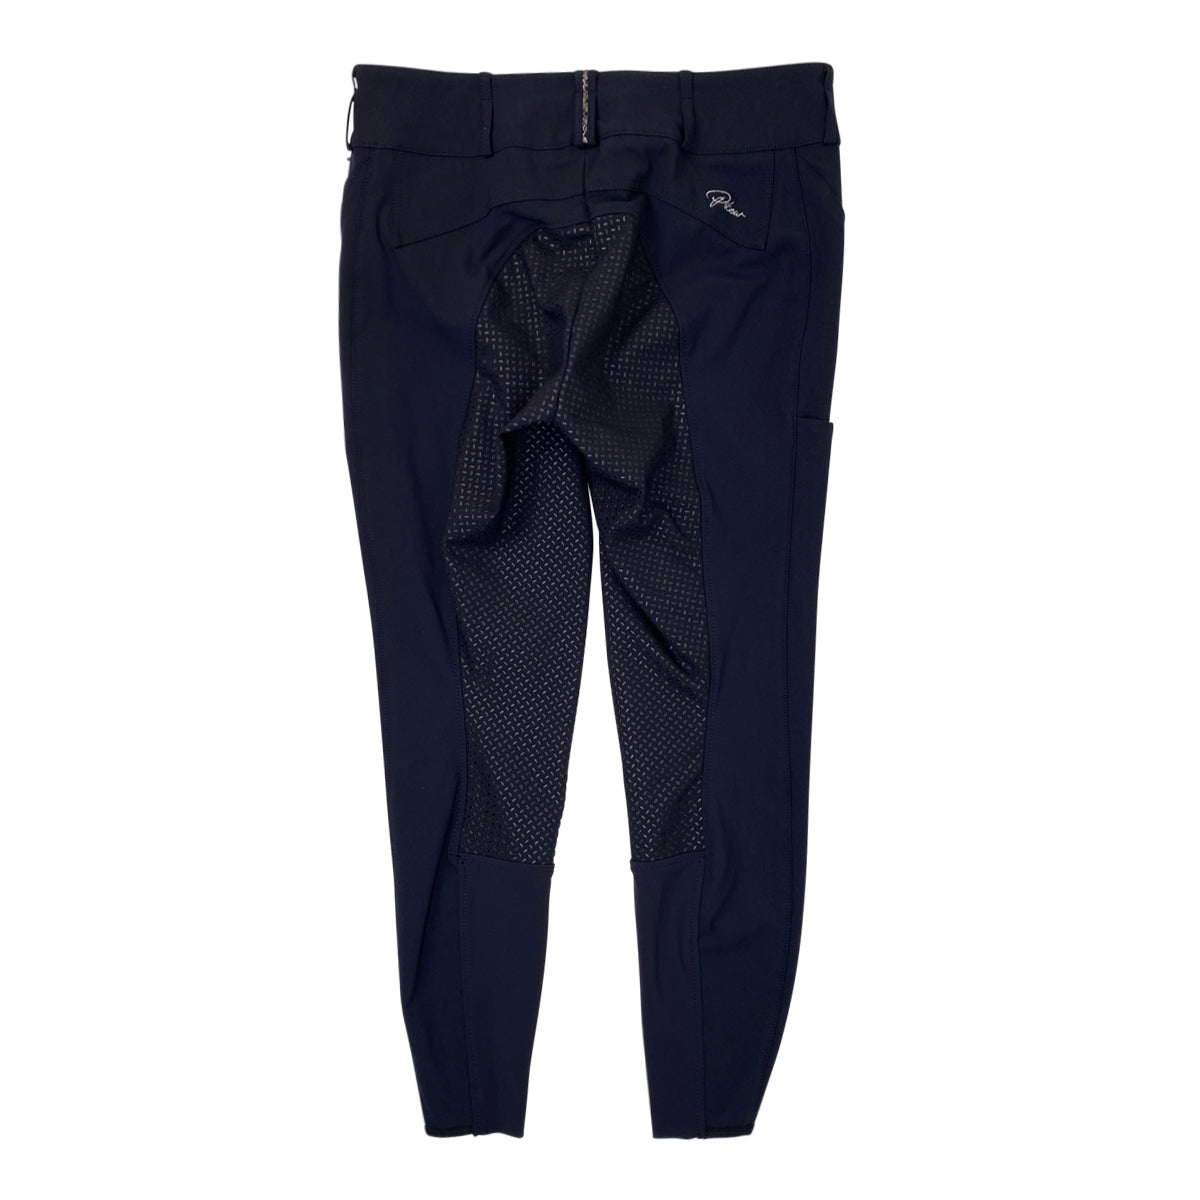 Pikeur 'Candela Glamour' Breeches in Navy